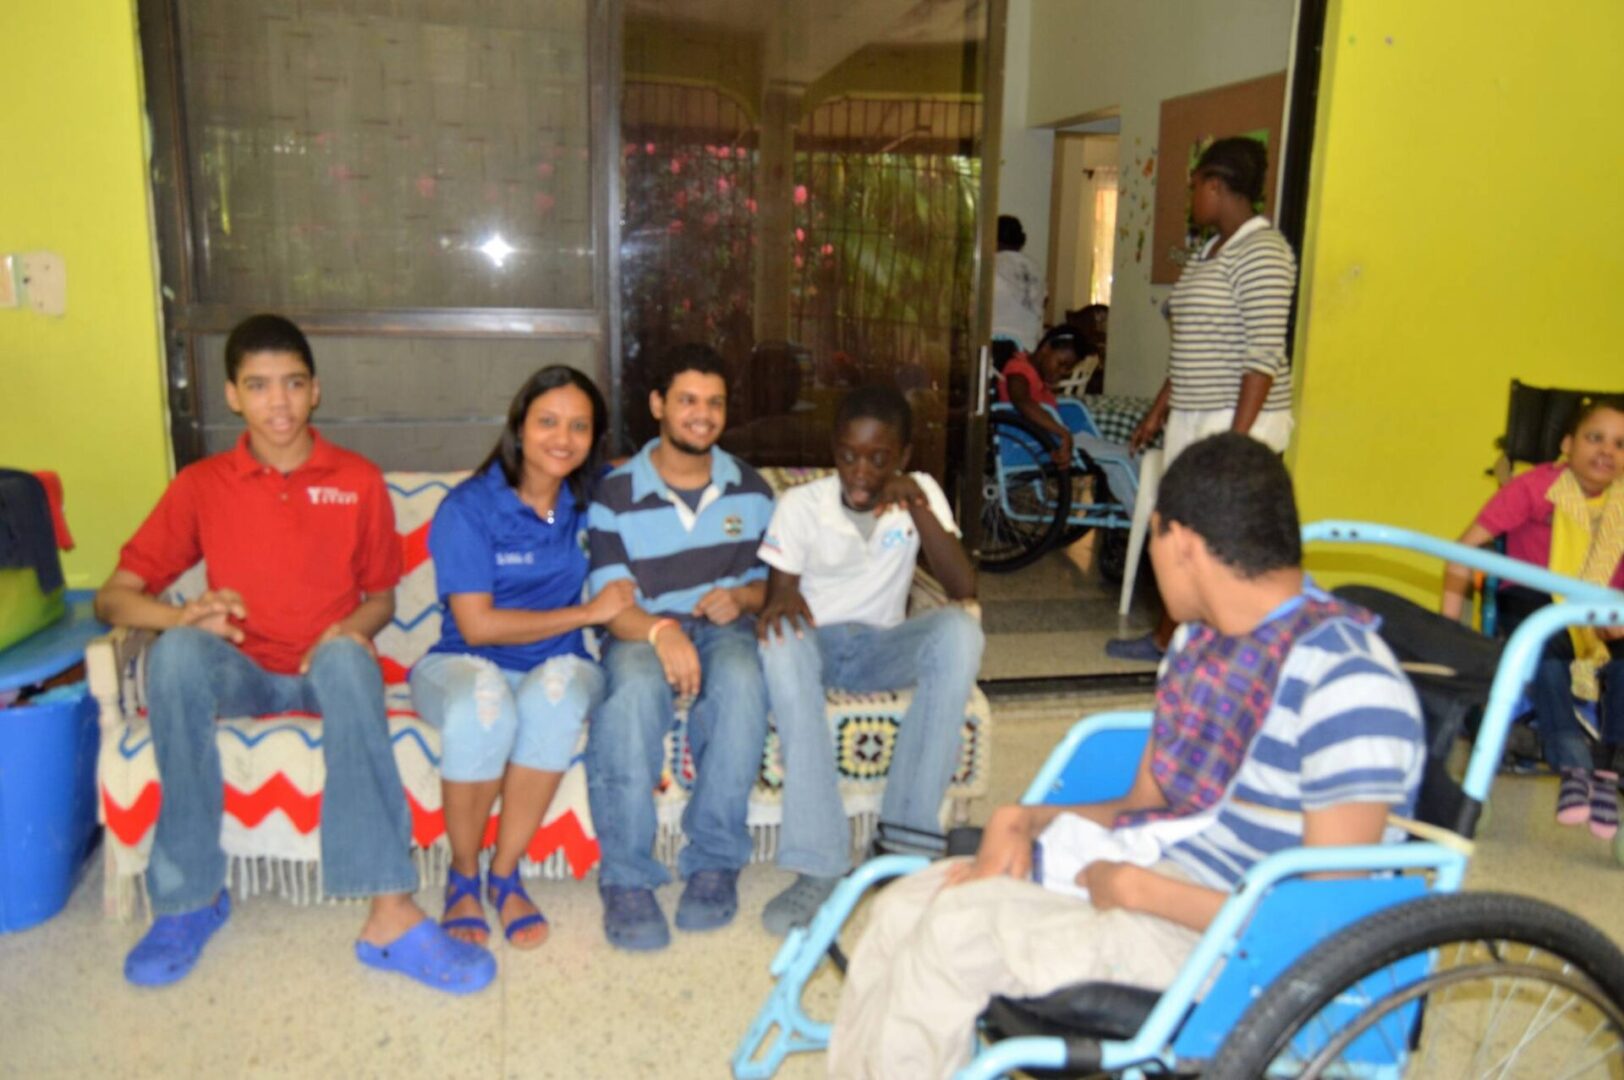 Our female staff sitting together with some of the disabled children from Casa Nazaret and another boy in a wheelchair